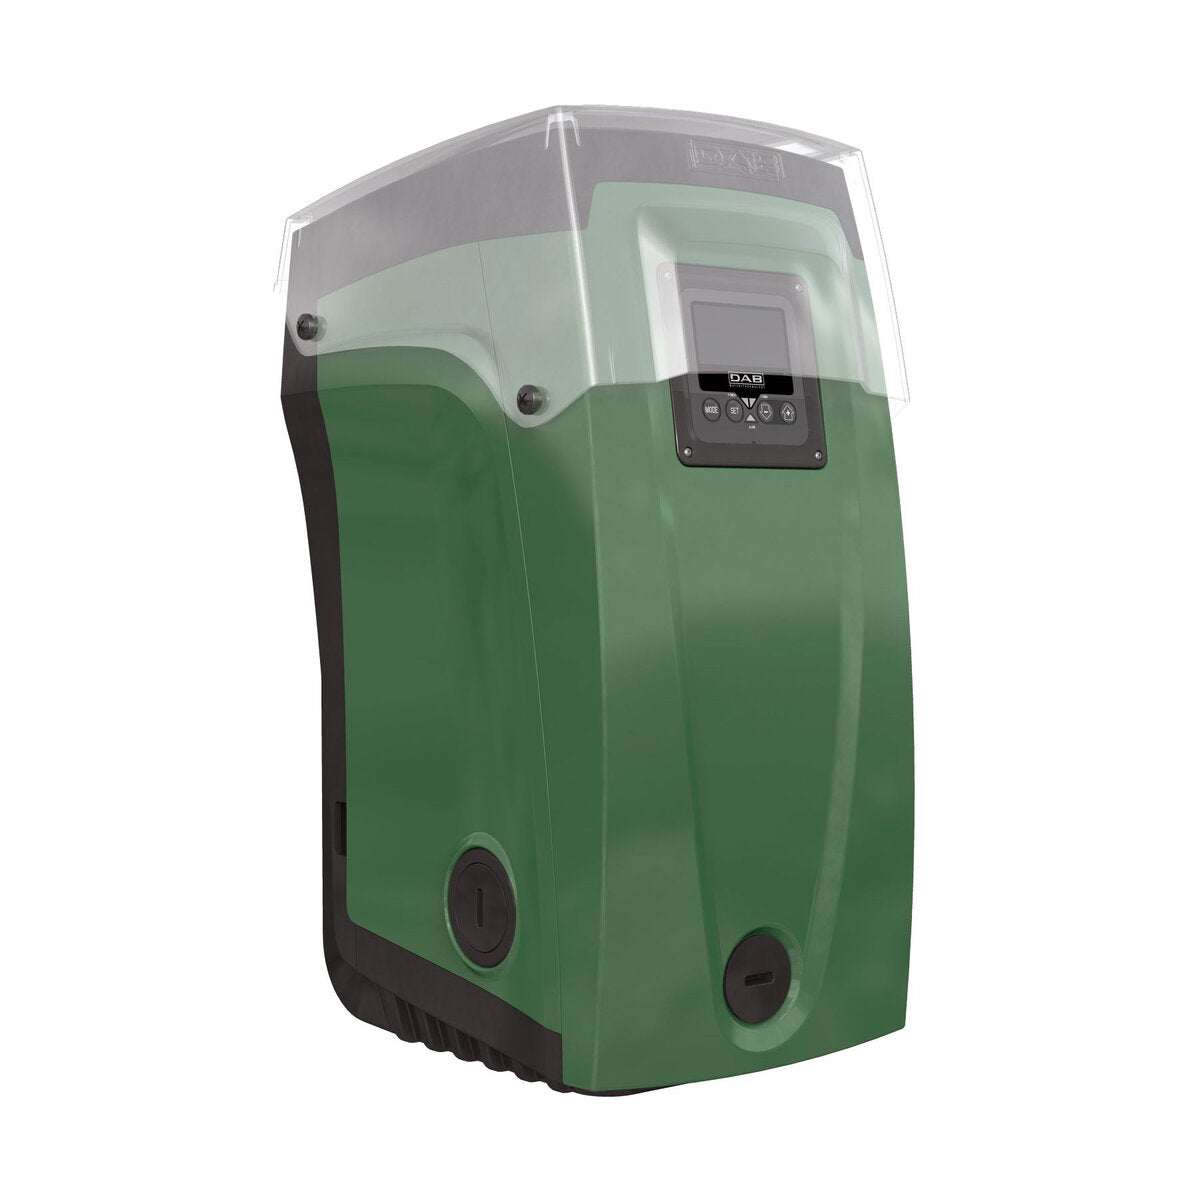 ESycover + Esygrid DAB outdoor kit for Esybox mini3 green